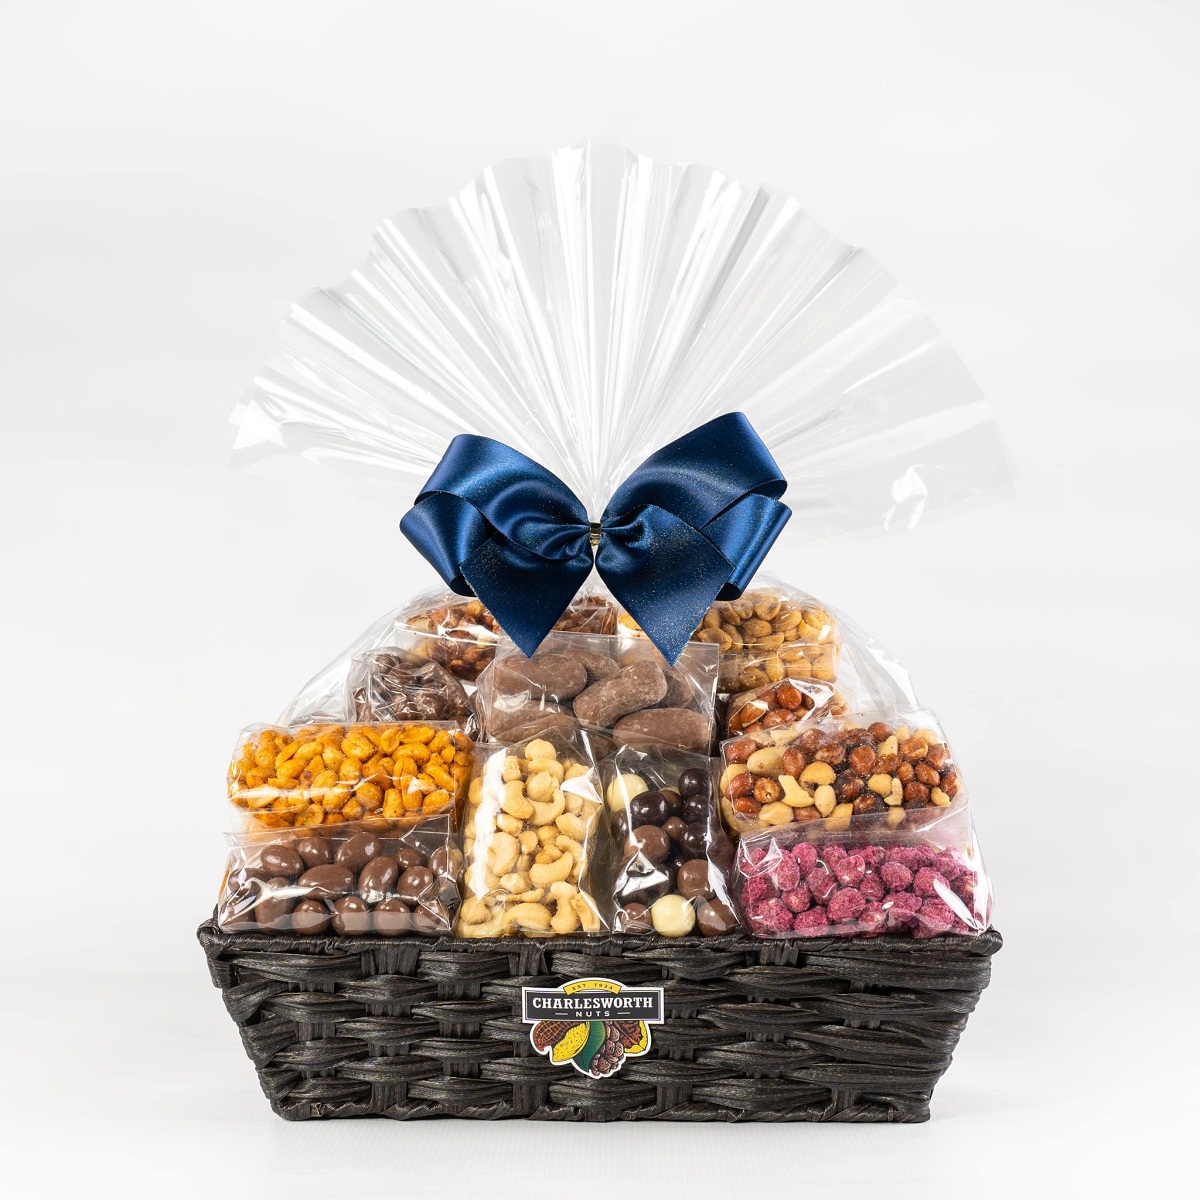 13 Incredible Nut Gift Baskets for 2023